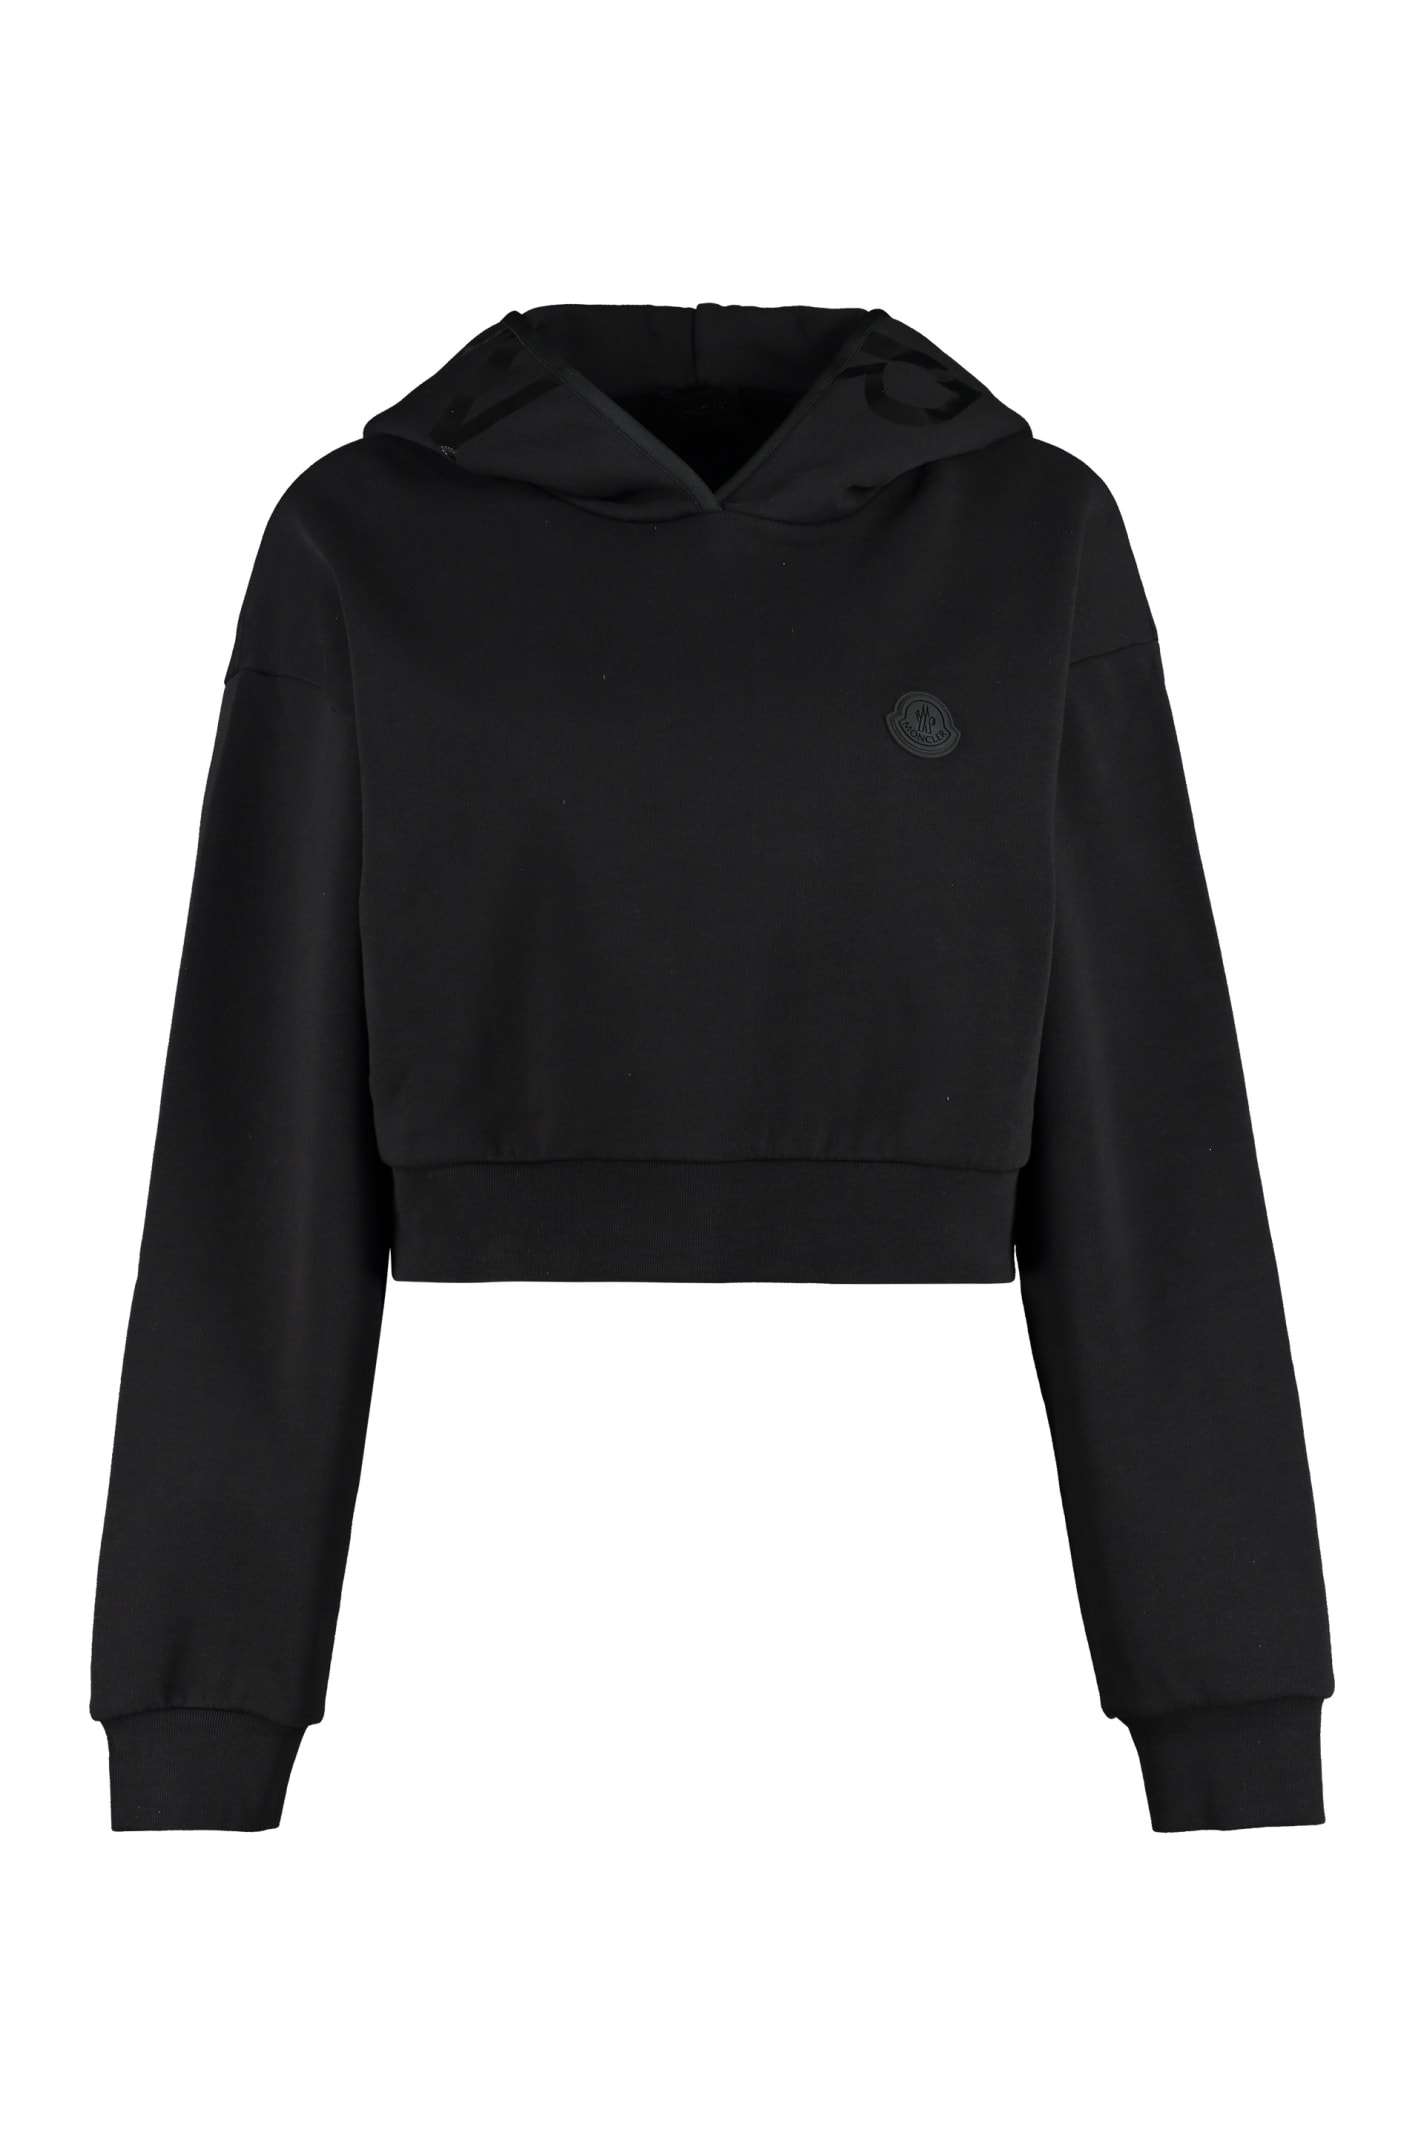 Moncler Cropped Hoodie